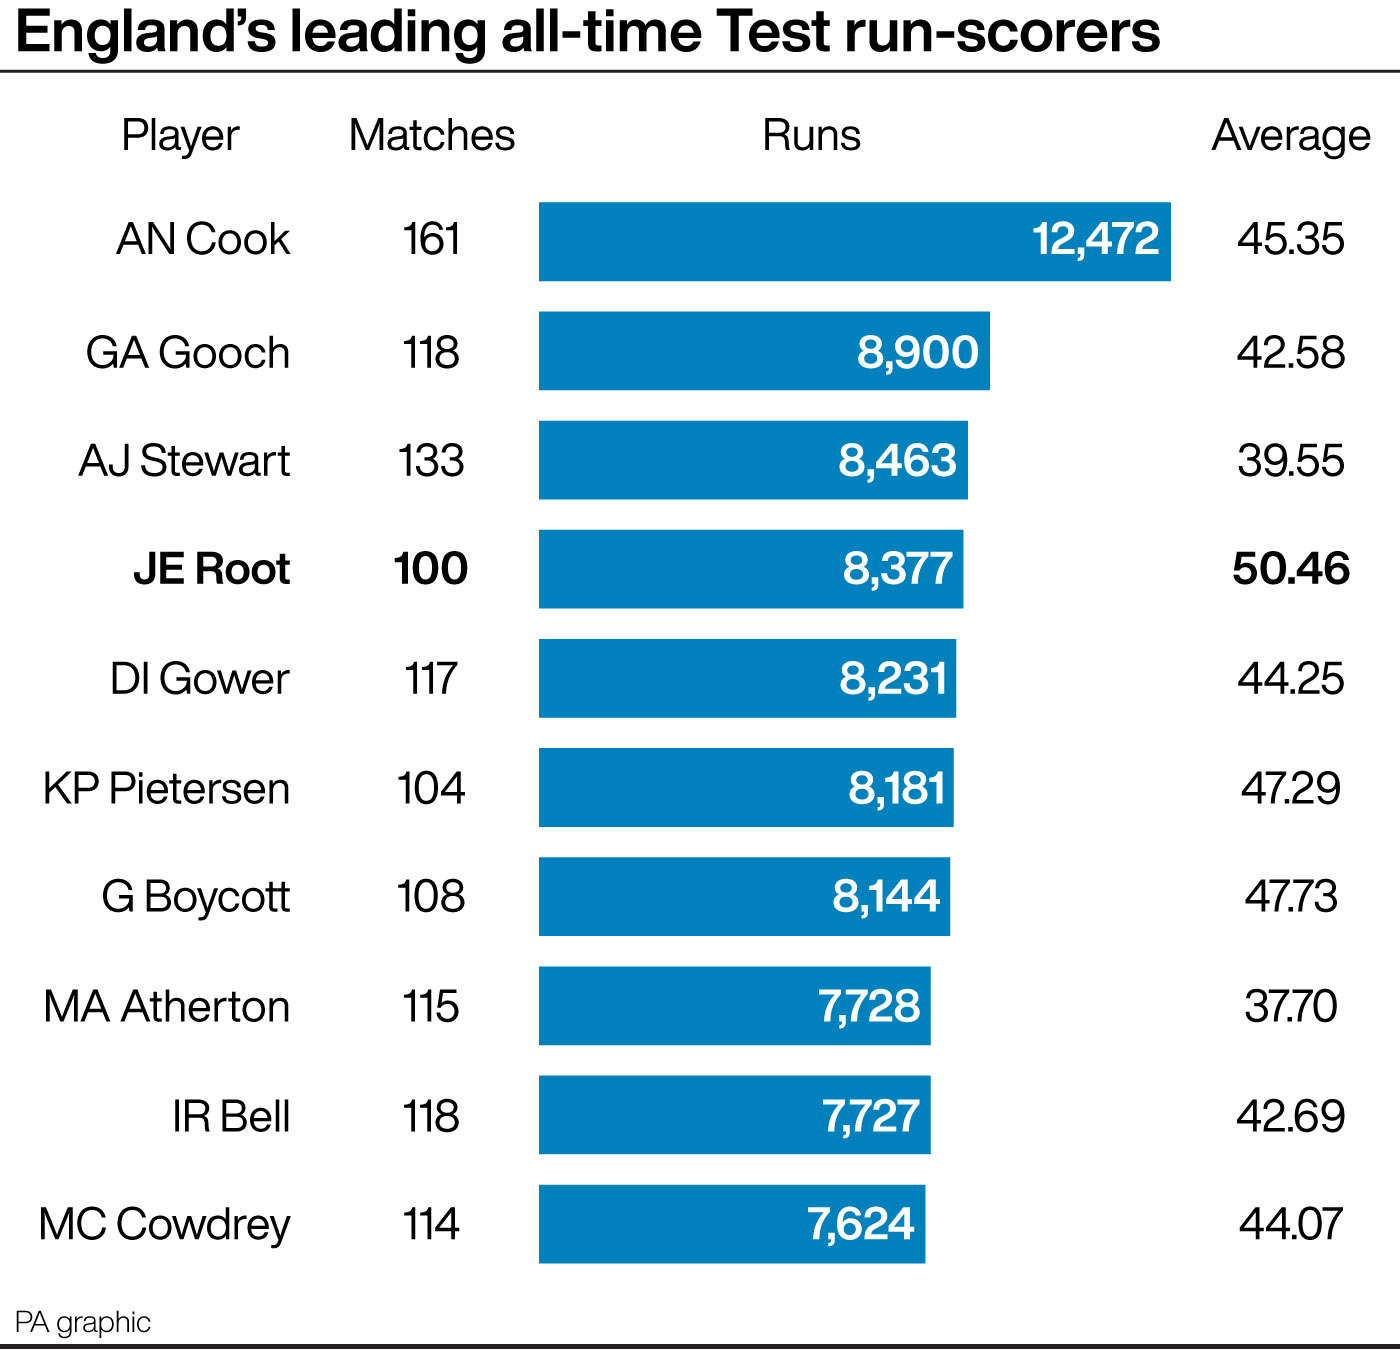 England's leading all-time Test run-scorers